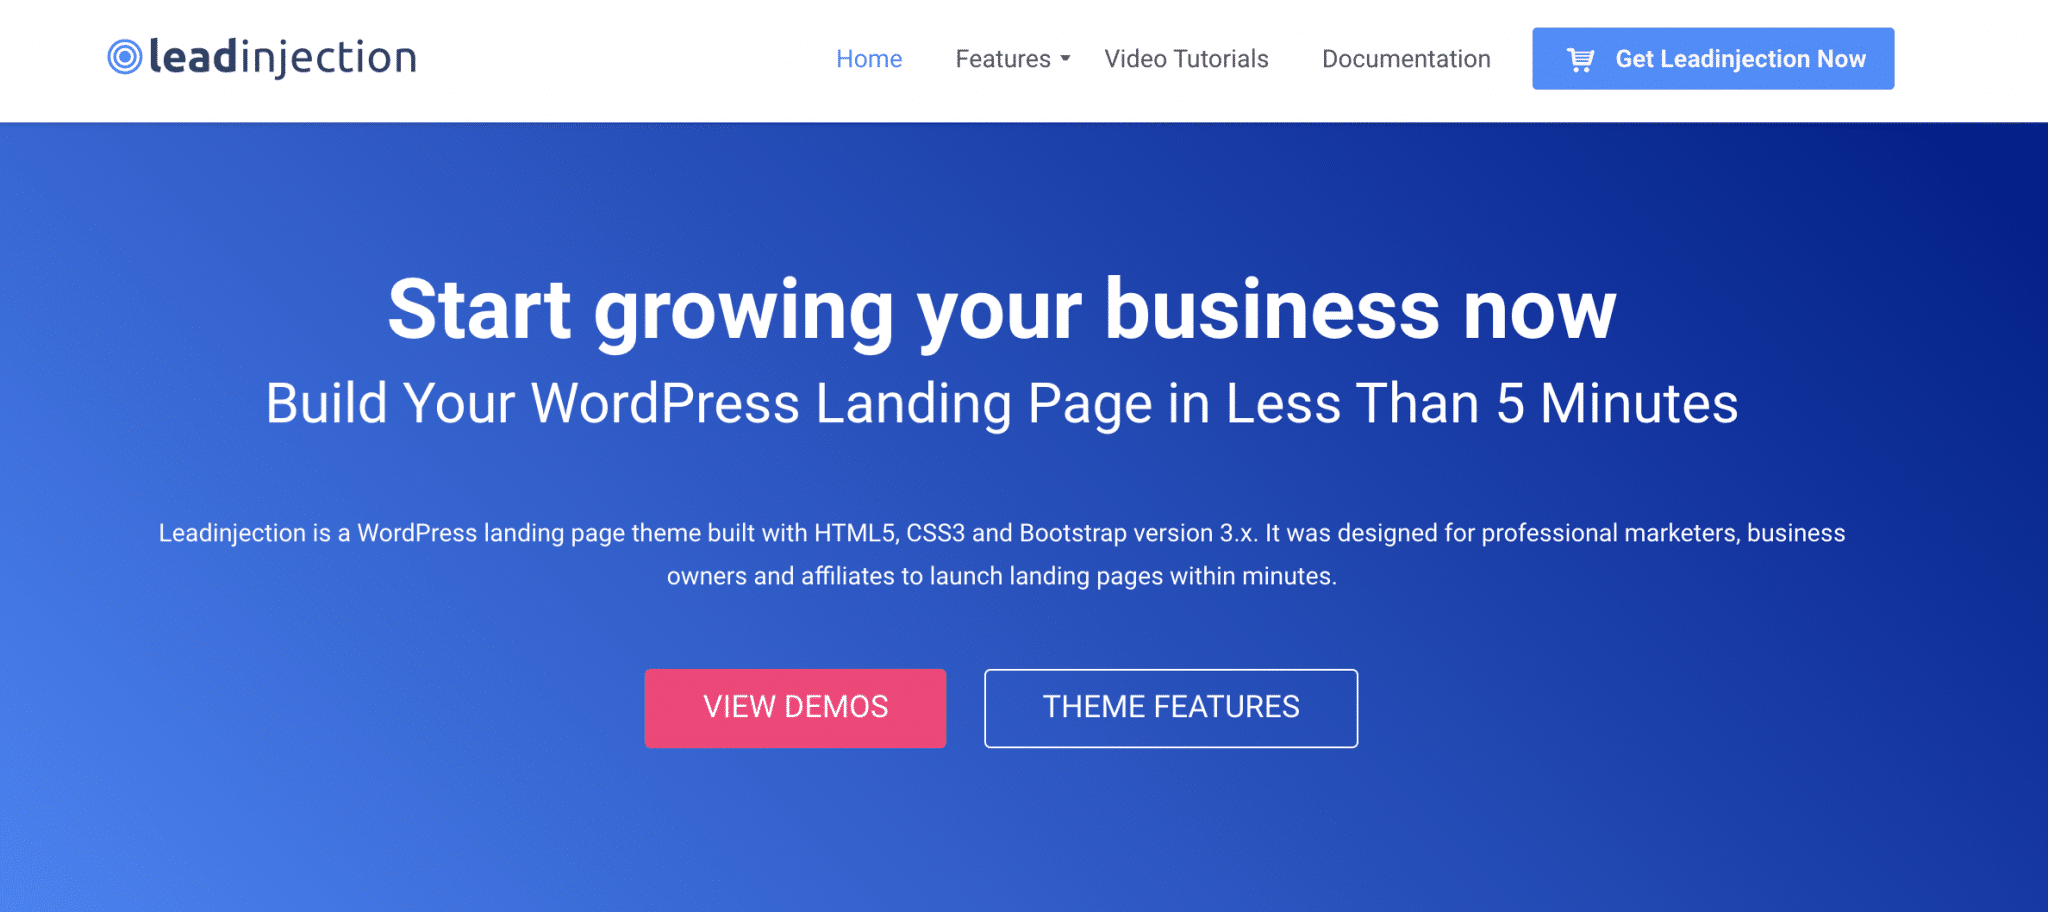 Leadinjection theme to build your WordPress landing page.